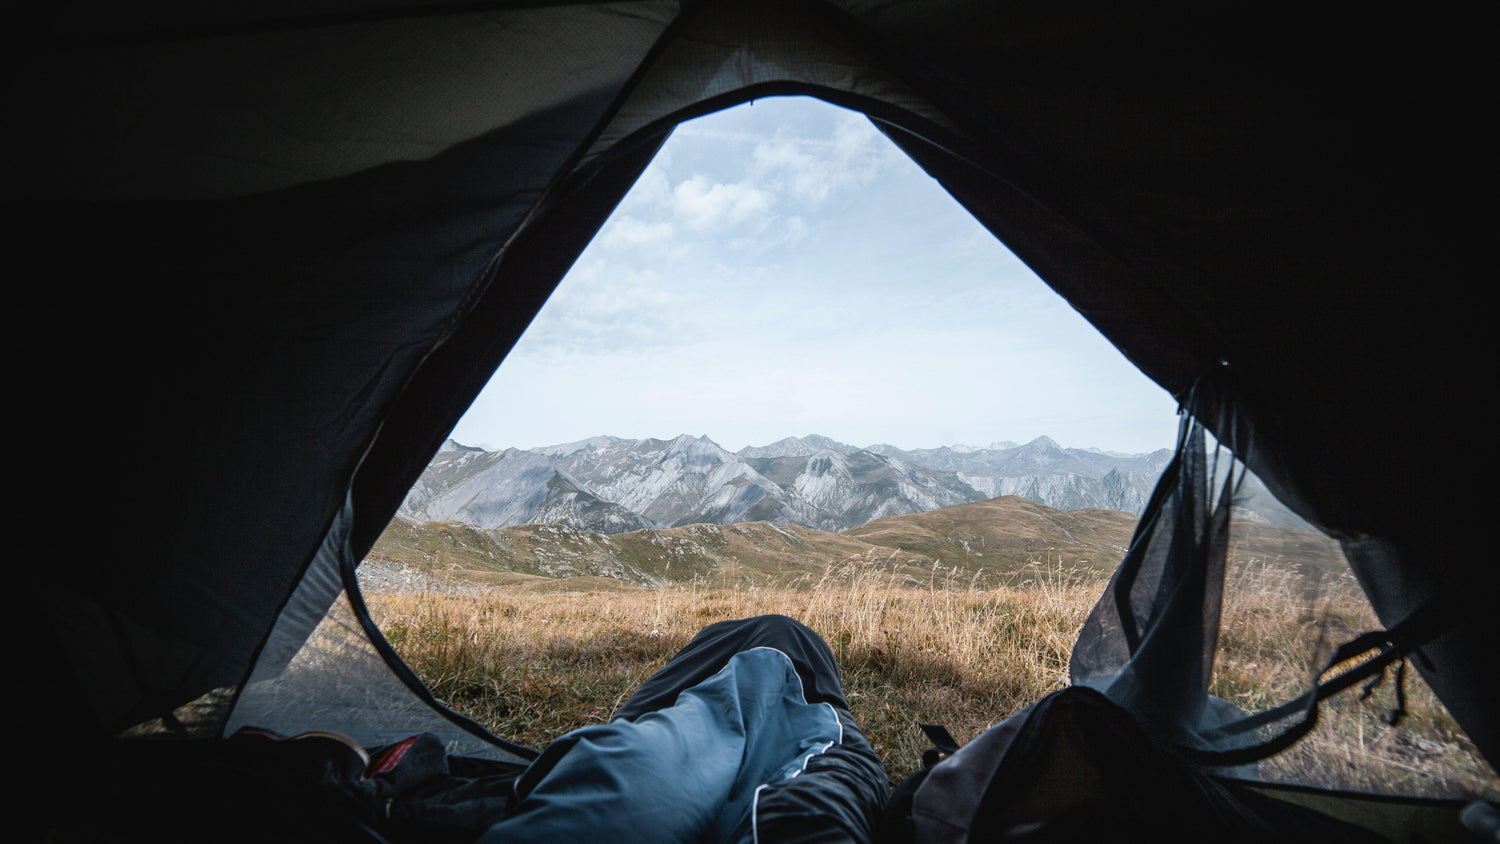 2019 Guide To The Best Sleeping Bags - Crua Outdoors